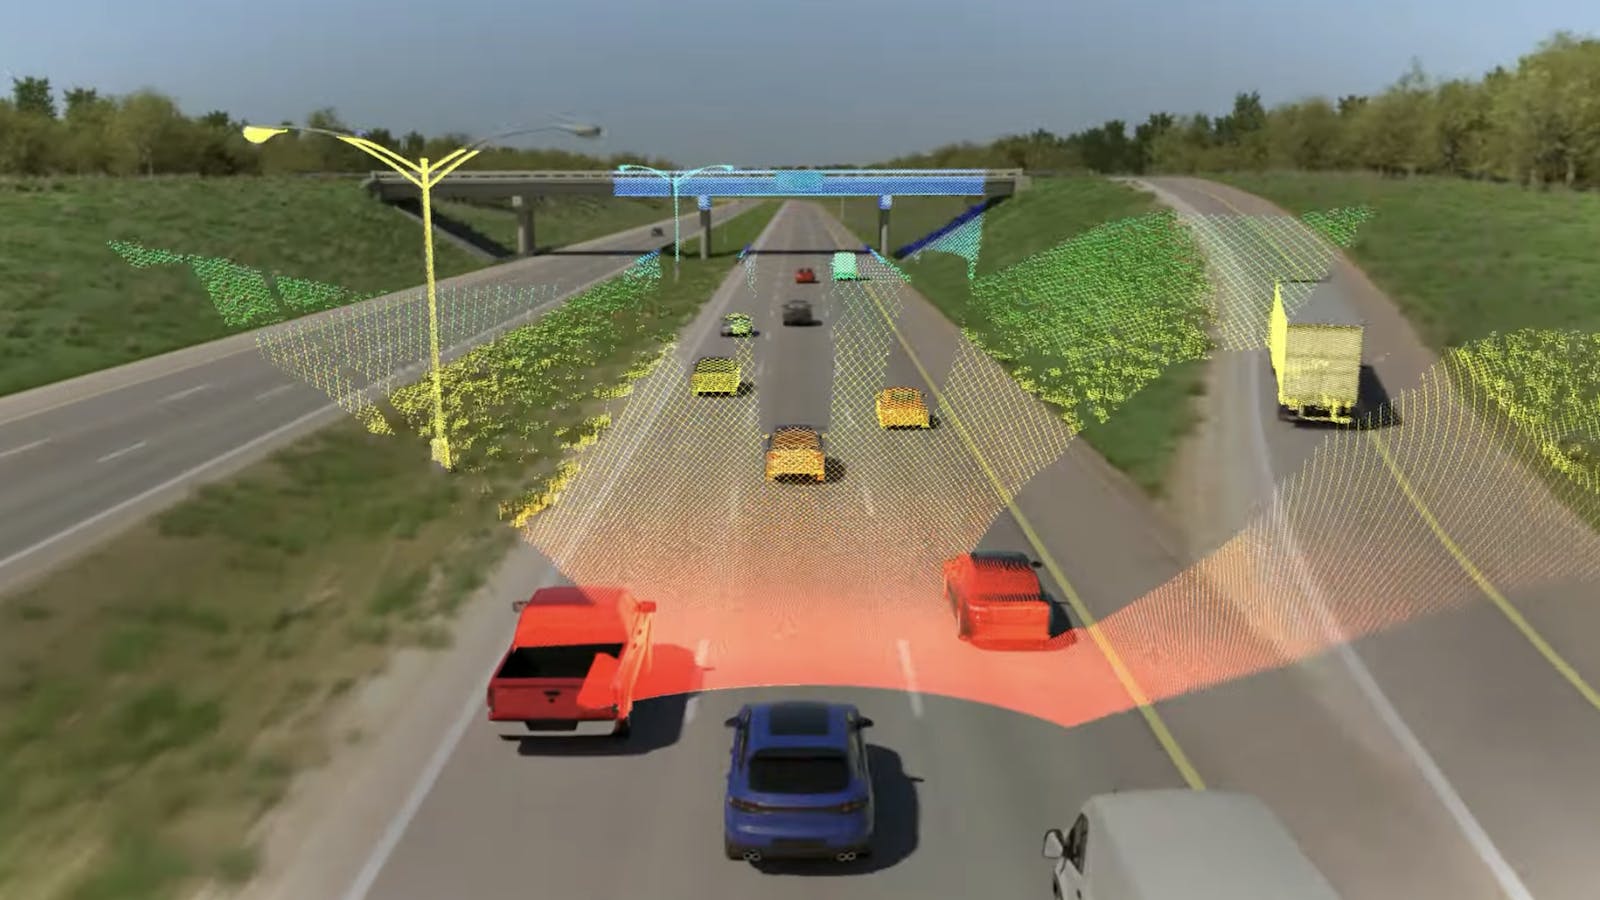 A mock-up of how MicroVision's Lidar sensor for autonomous vehicles works. Picture by MicroVision.